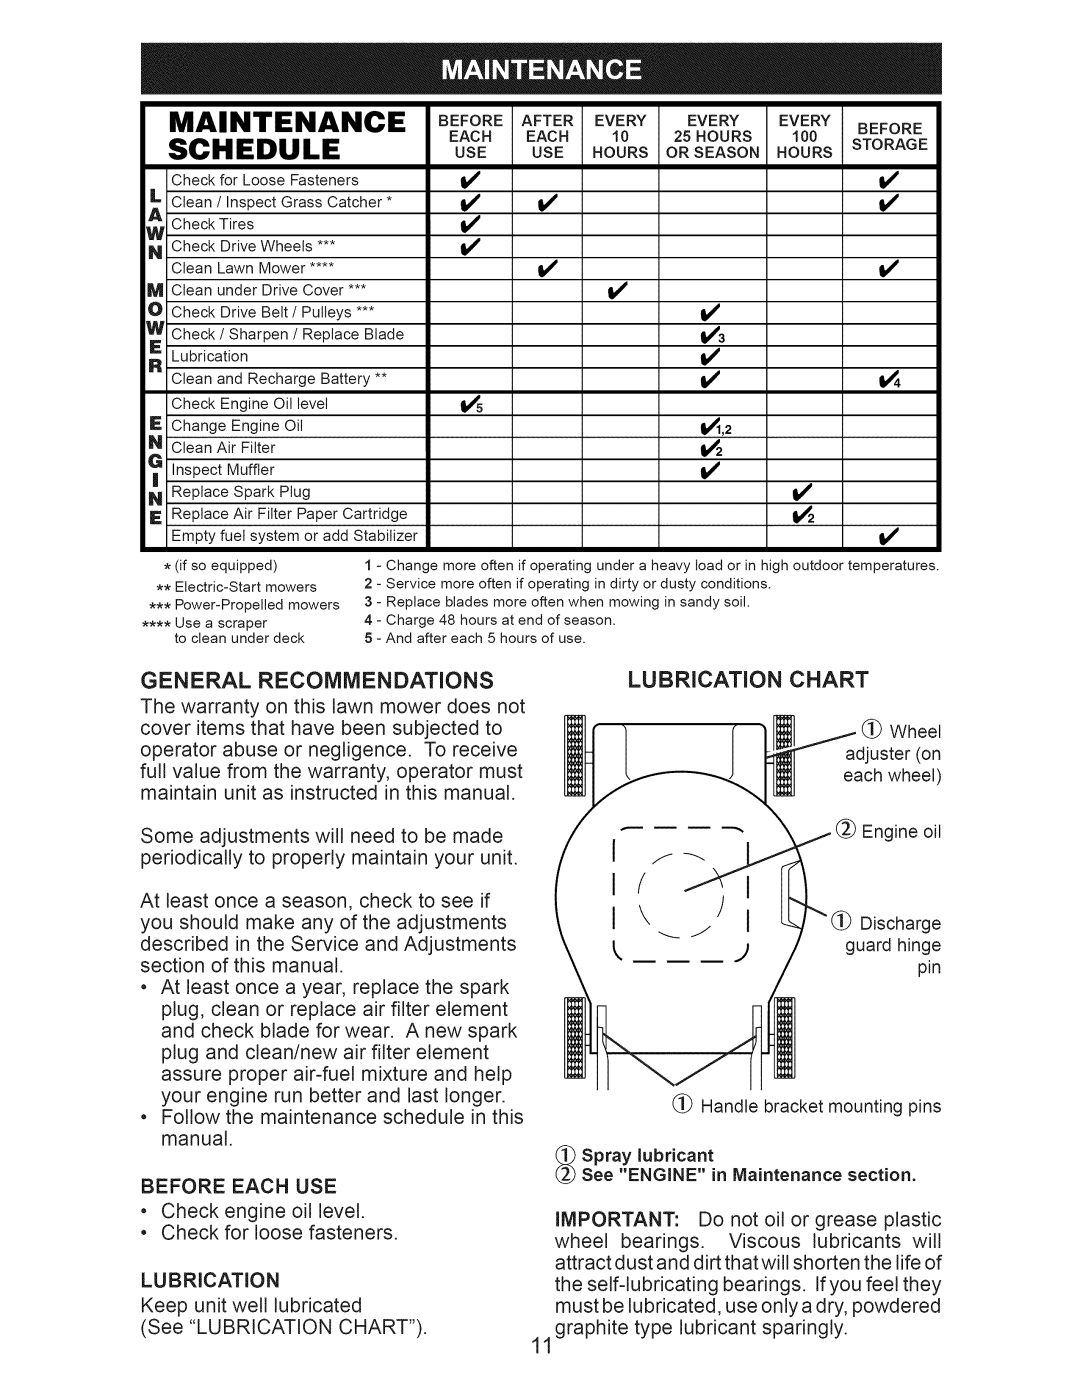 Craftsman 917.375010 owner manual Maintenance, Schedule, Use Hours 